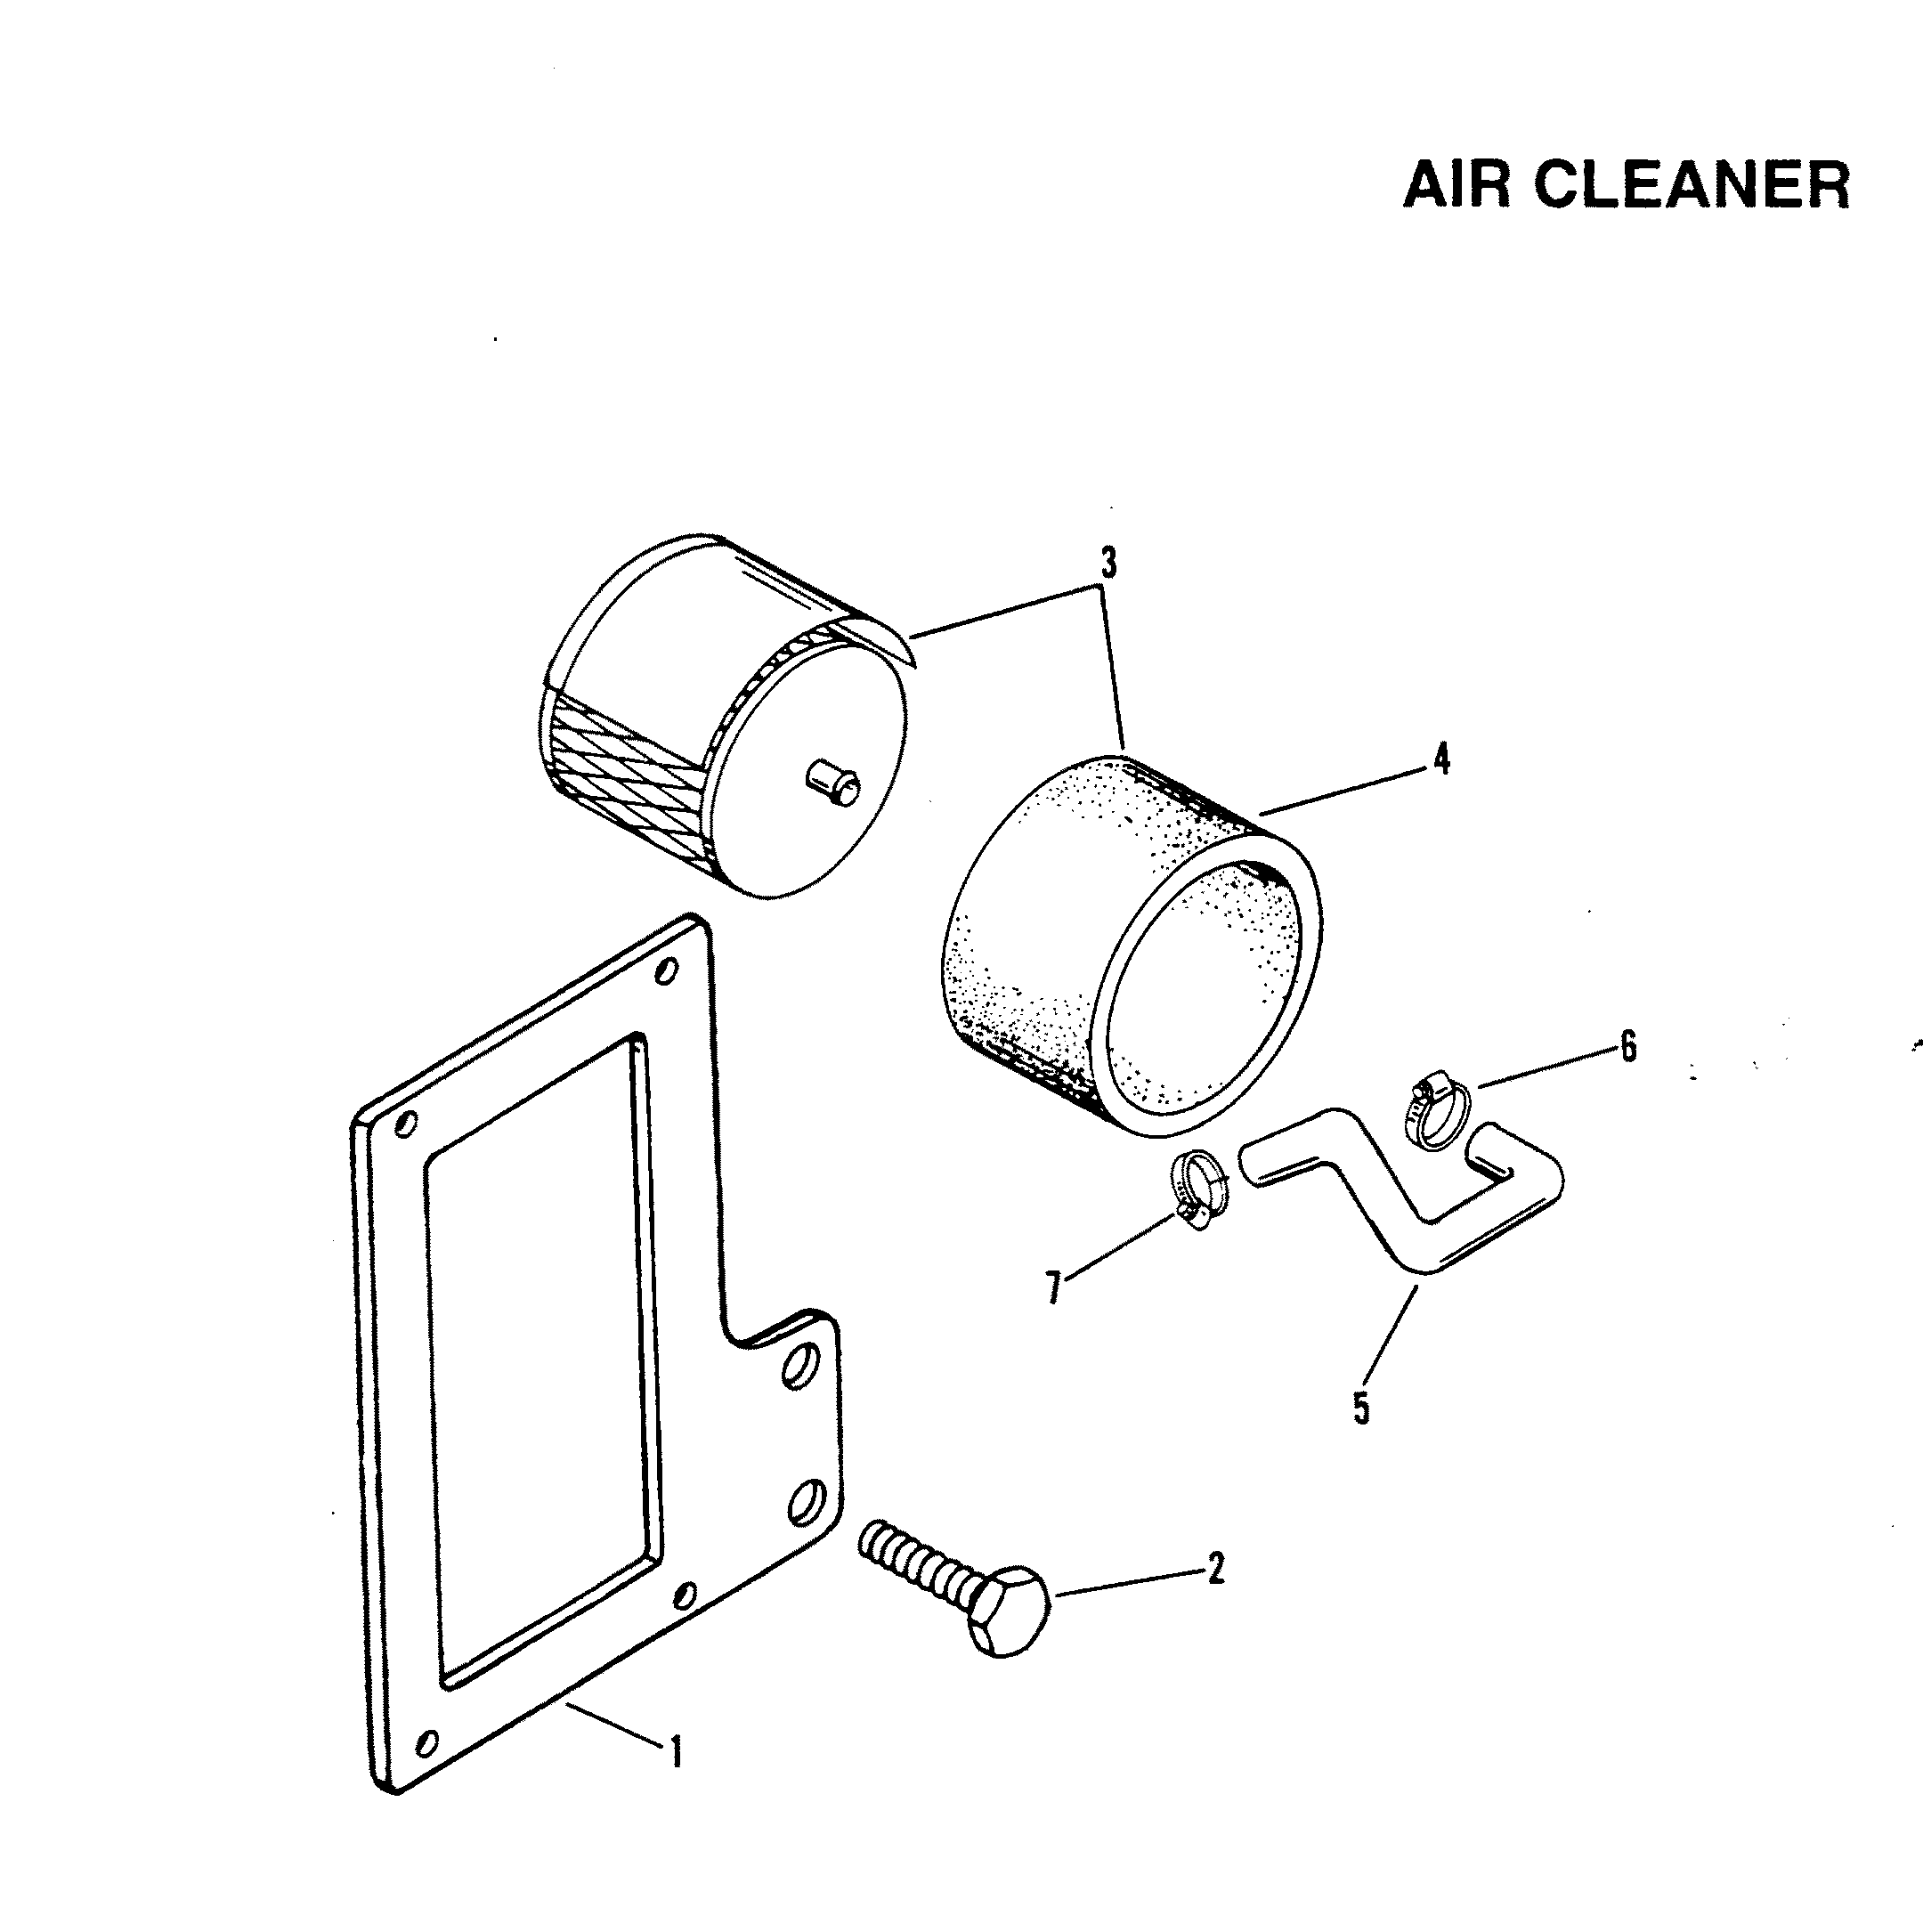 AIR CLEANER (NEW DESIGN)